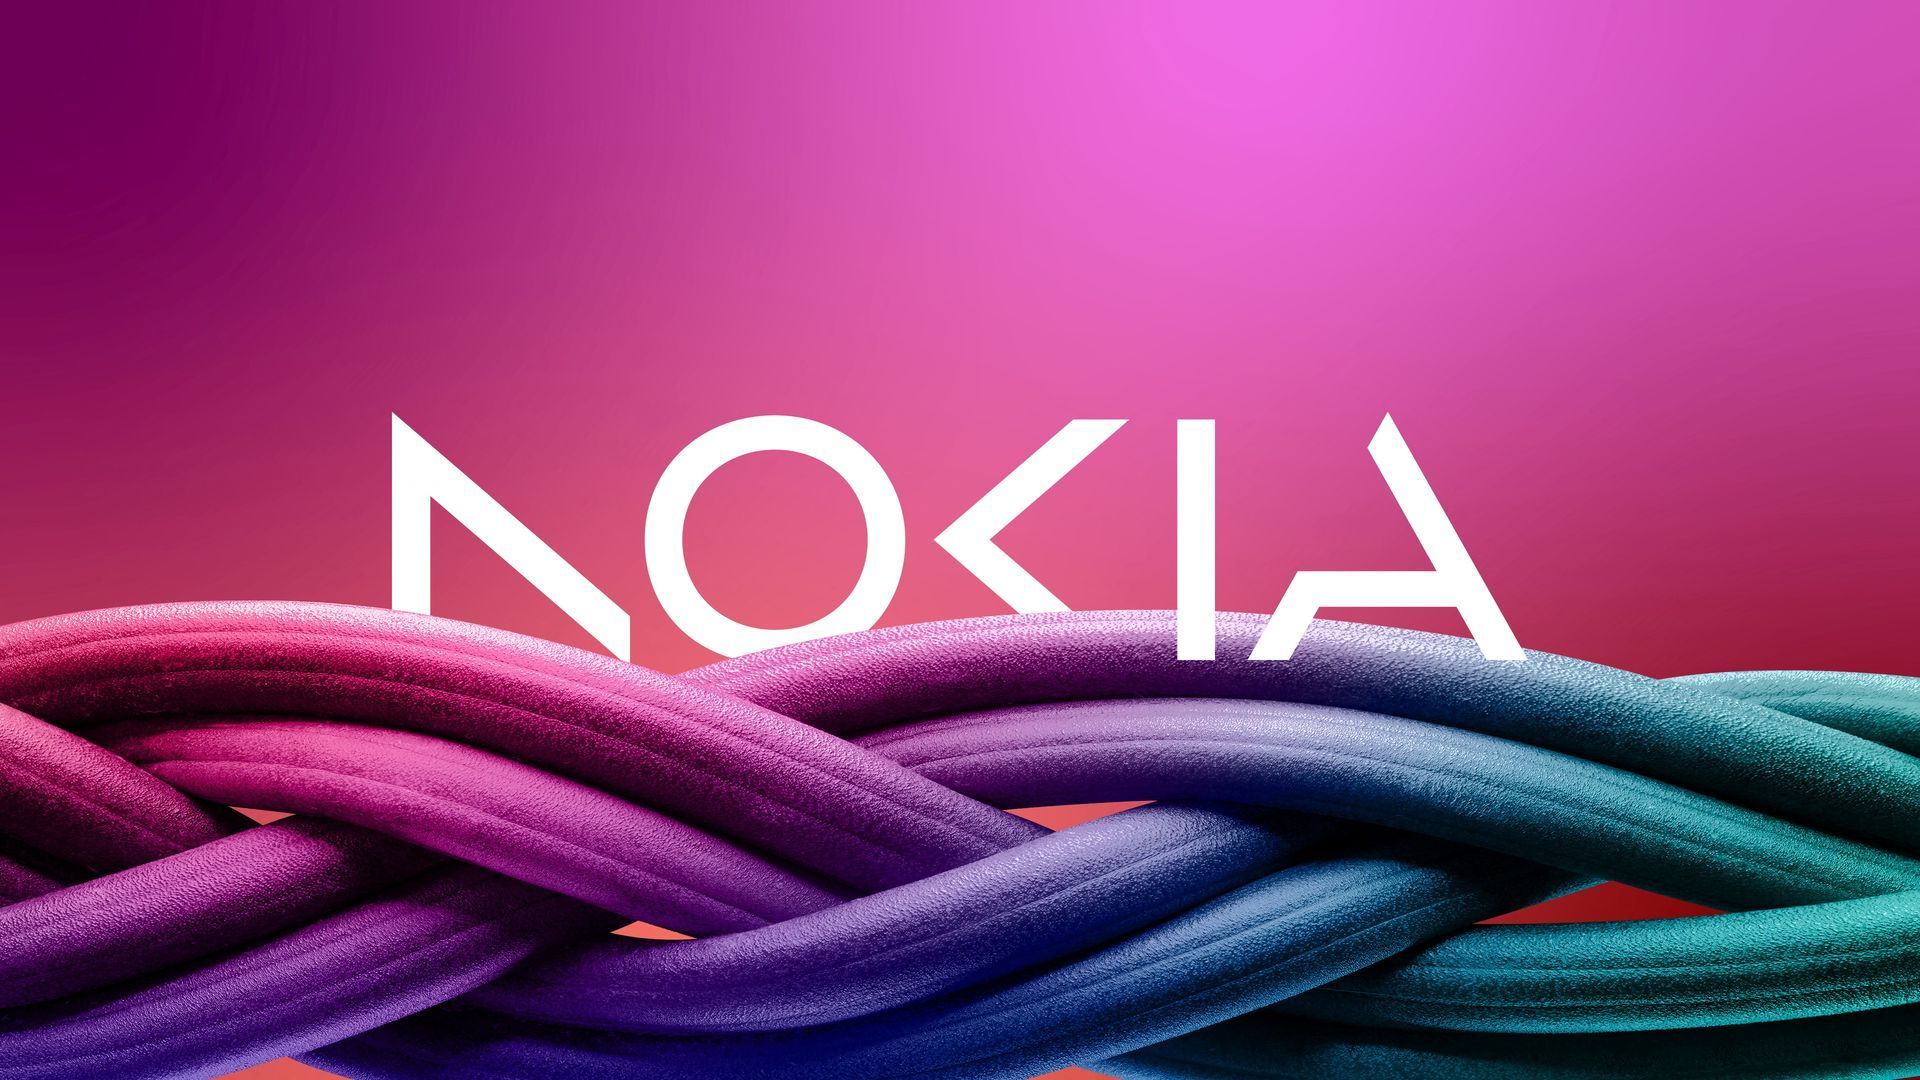 New Nokia logo made old stagers sentimental